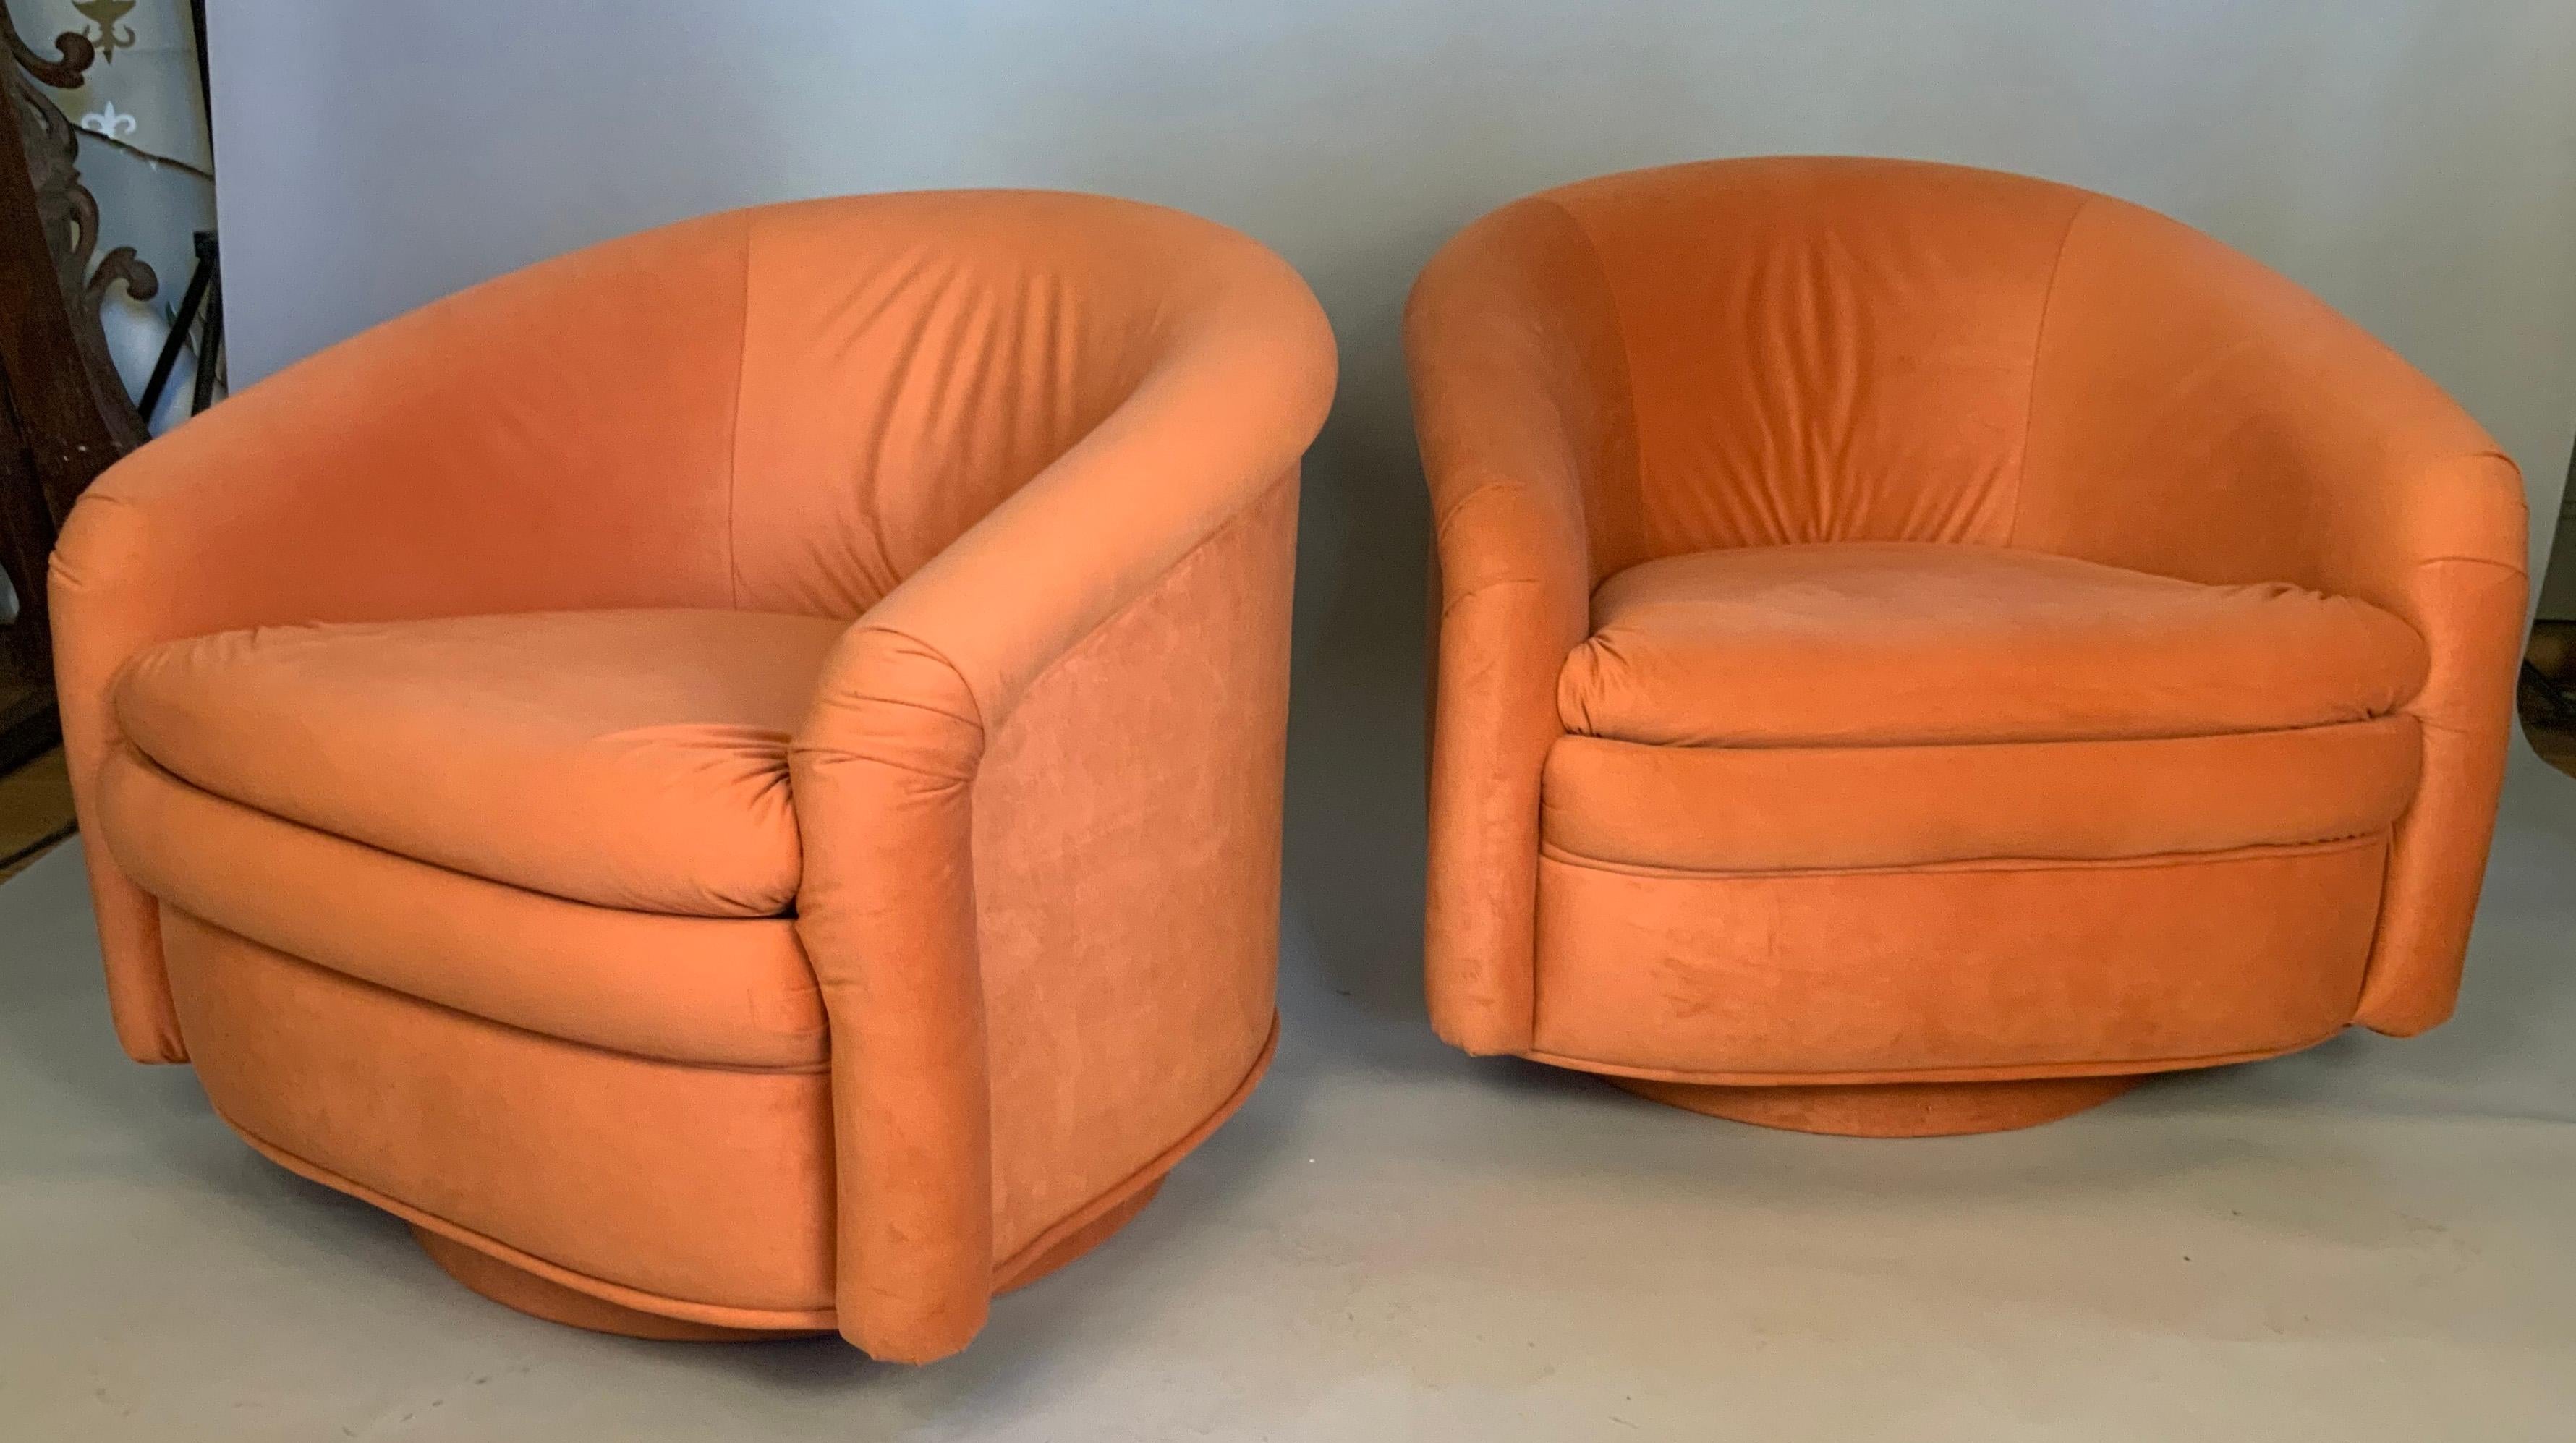 A very stylish and extremely comfortable pair of vintage 1970's swivel lounge chairs, with rounded backs and upholstered swivel bases. great scale and details - in their original orange fabric, which has light wear.